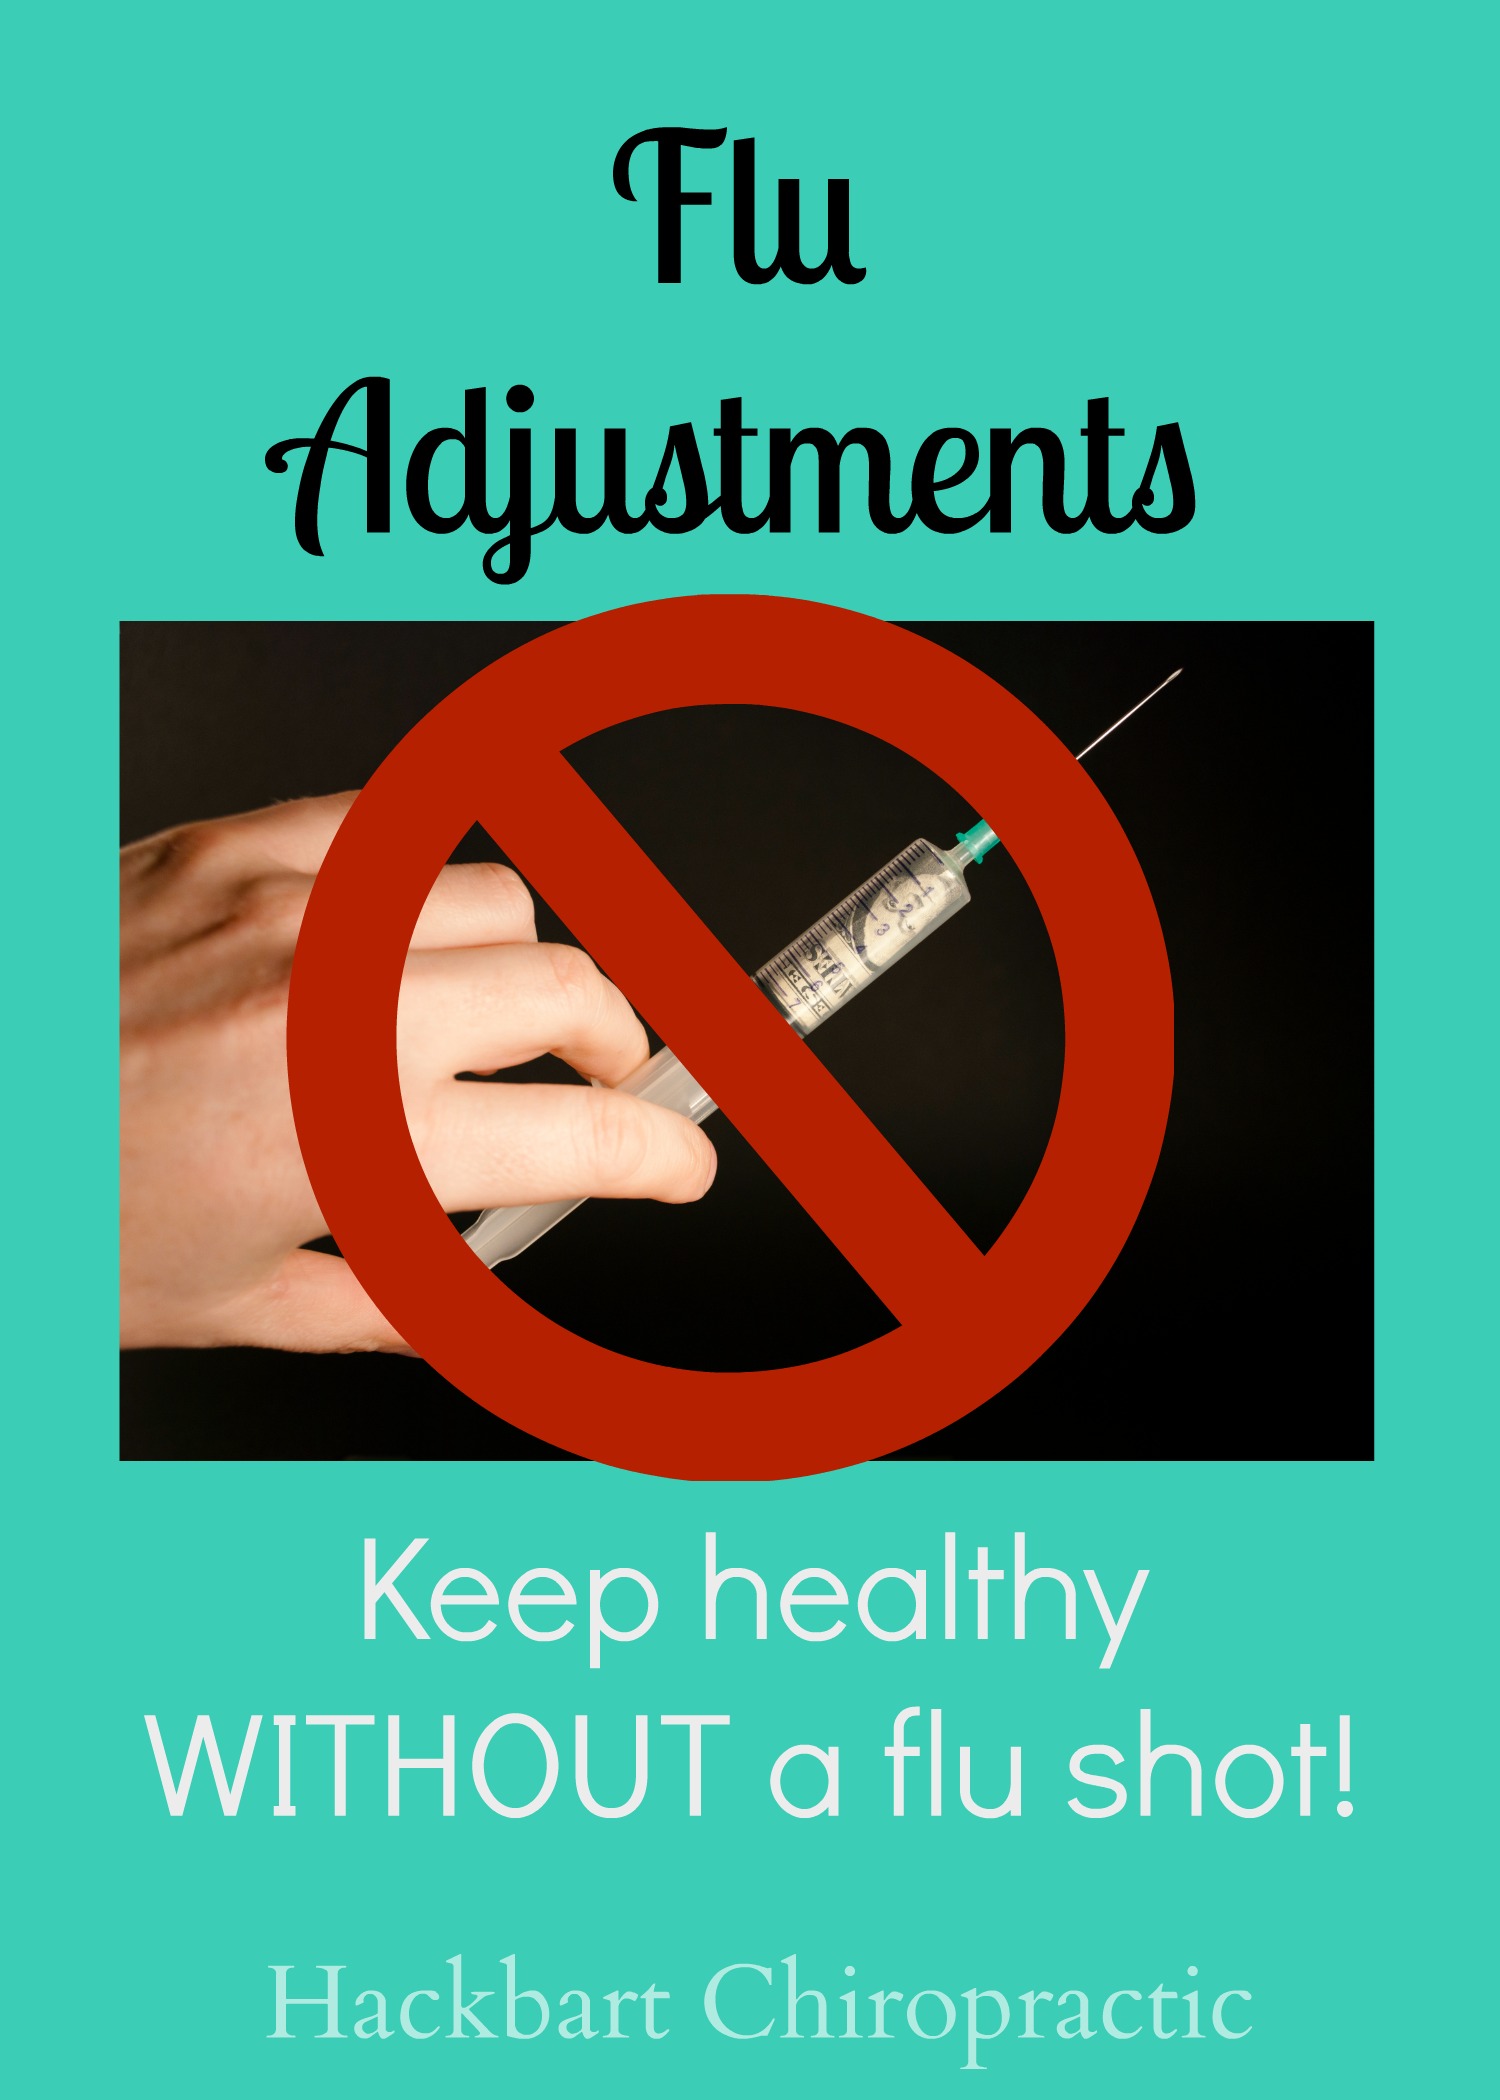 chiropractic care in college park for cold and flu relief | AICA College Park